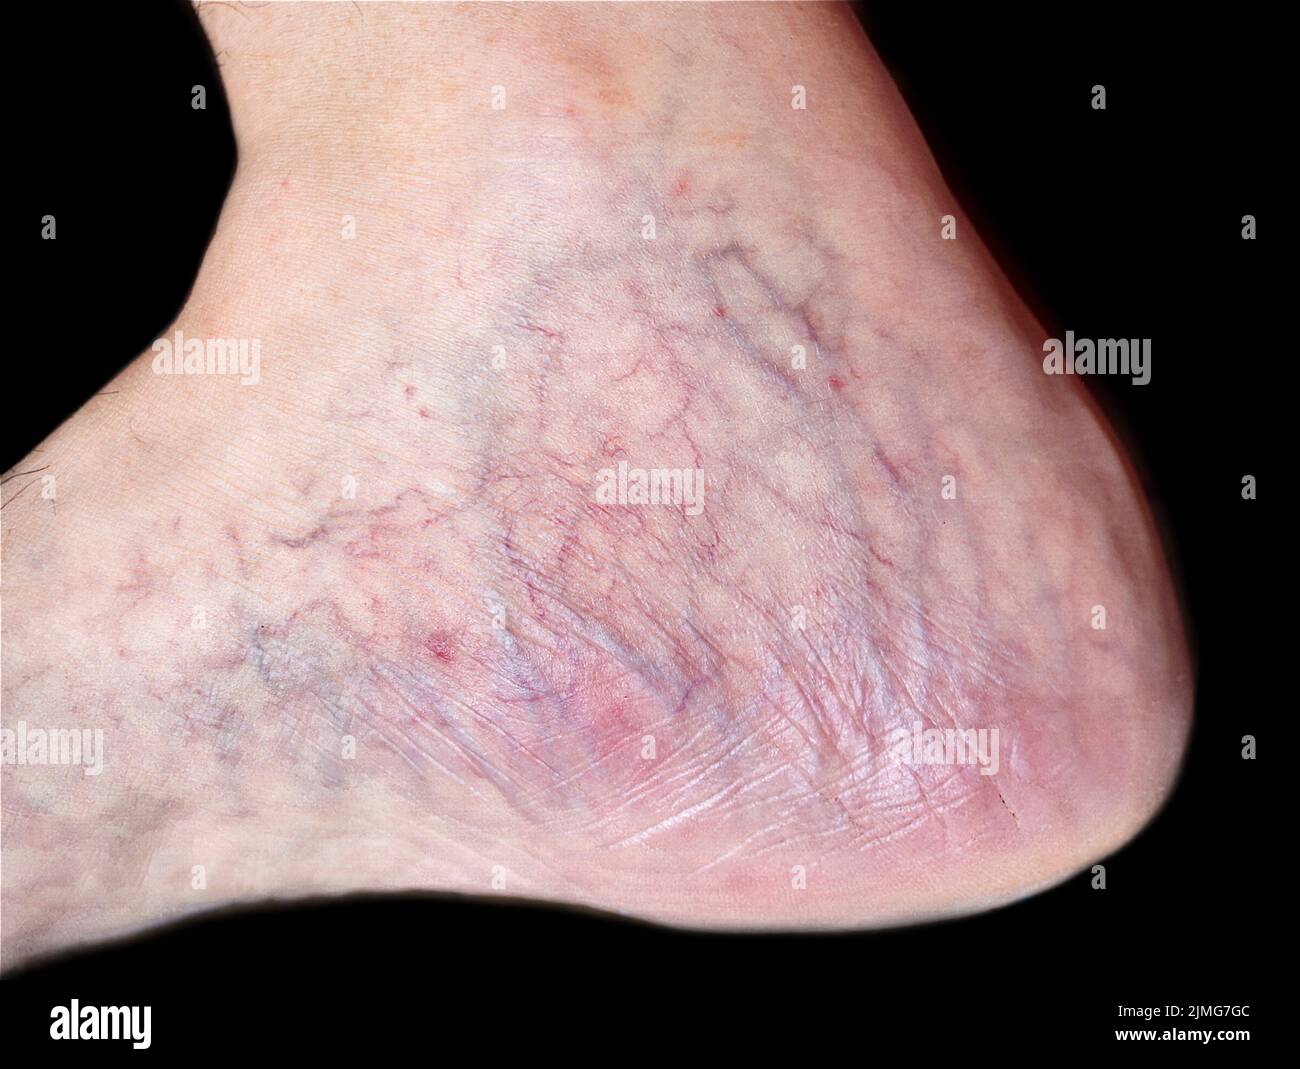 Skin wrinkles and prominent veins visible through the thin foot skin of Asian old man. Stock Photo